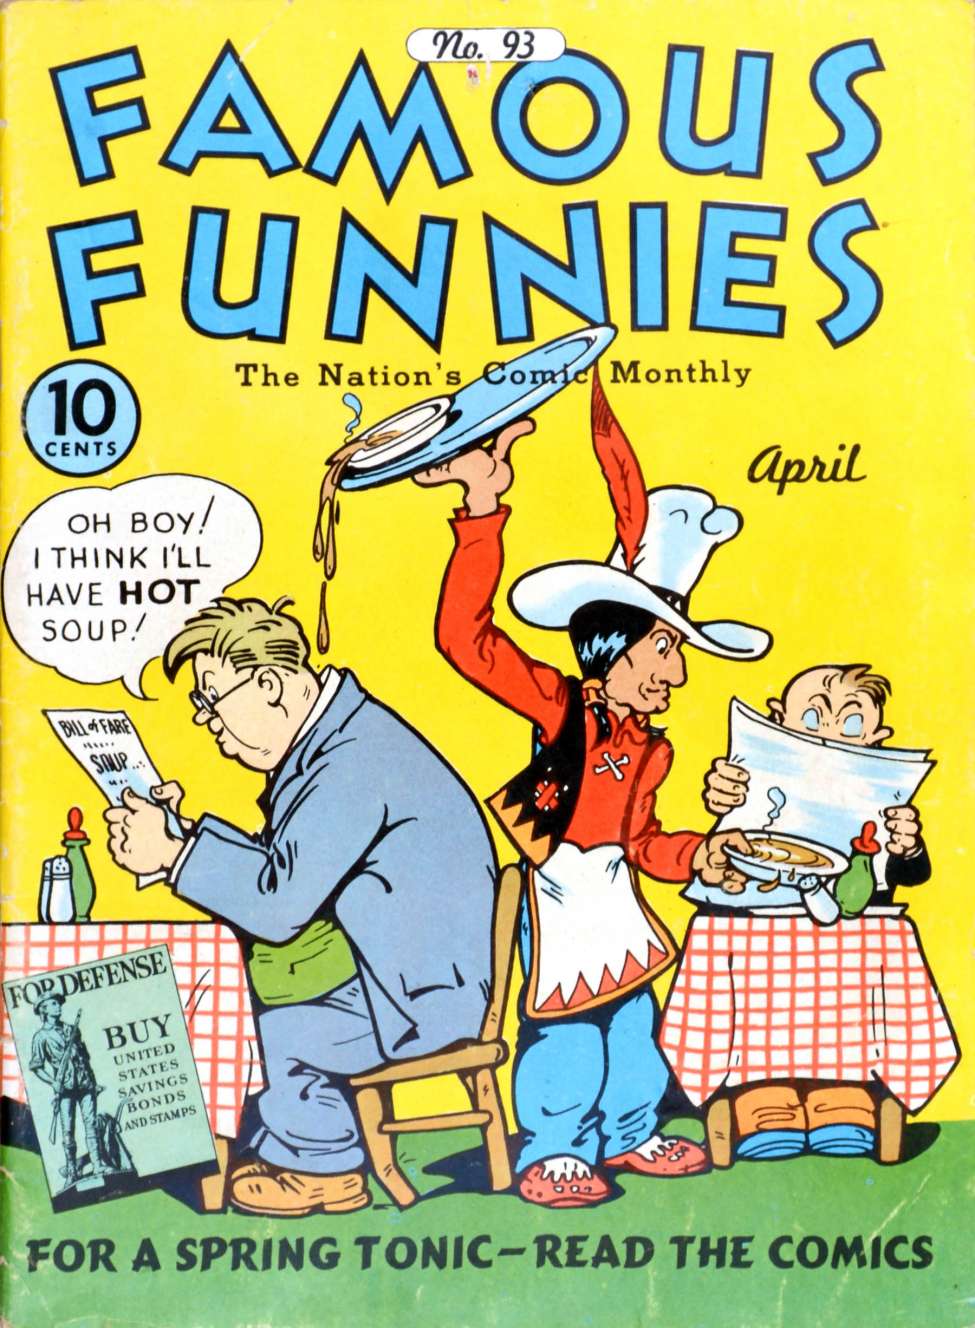 Book Cover For Famous Funnies 93